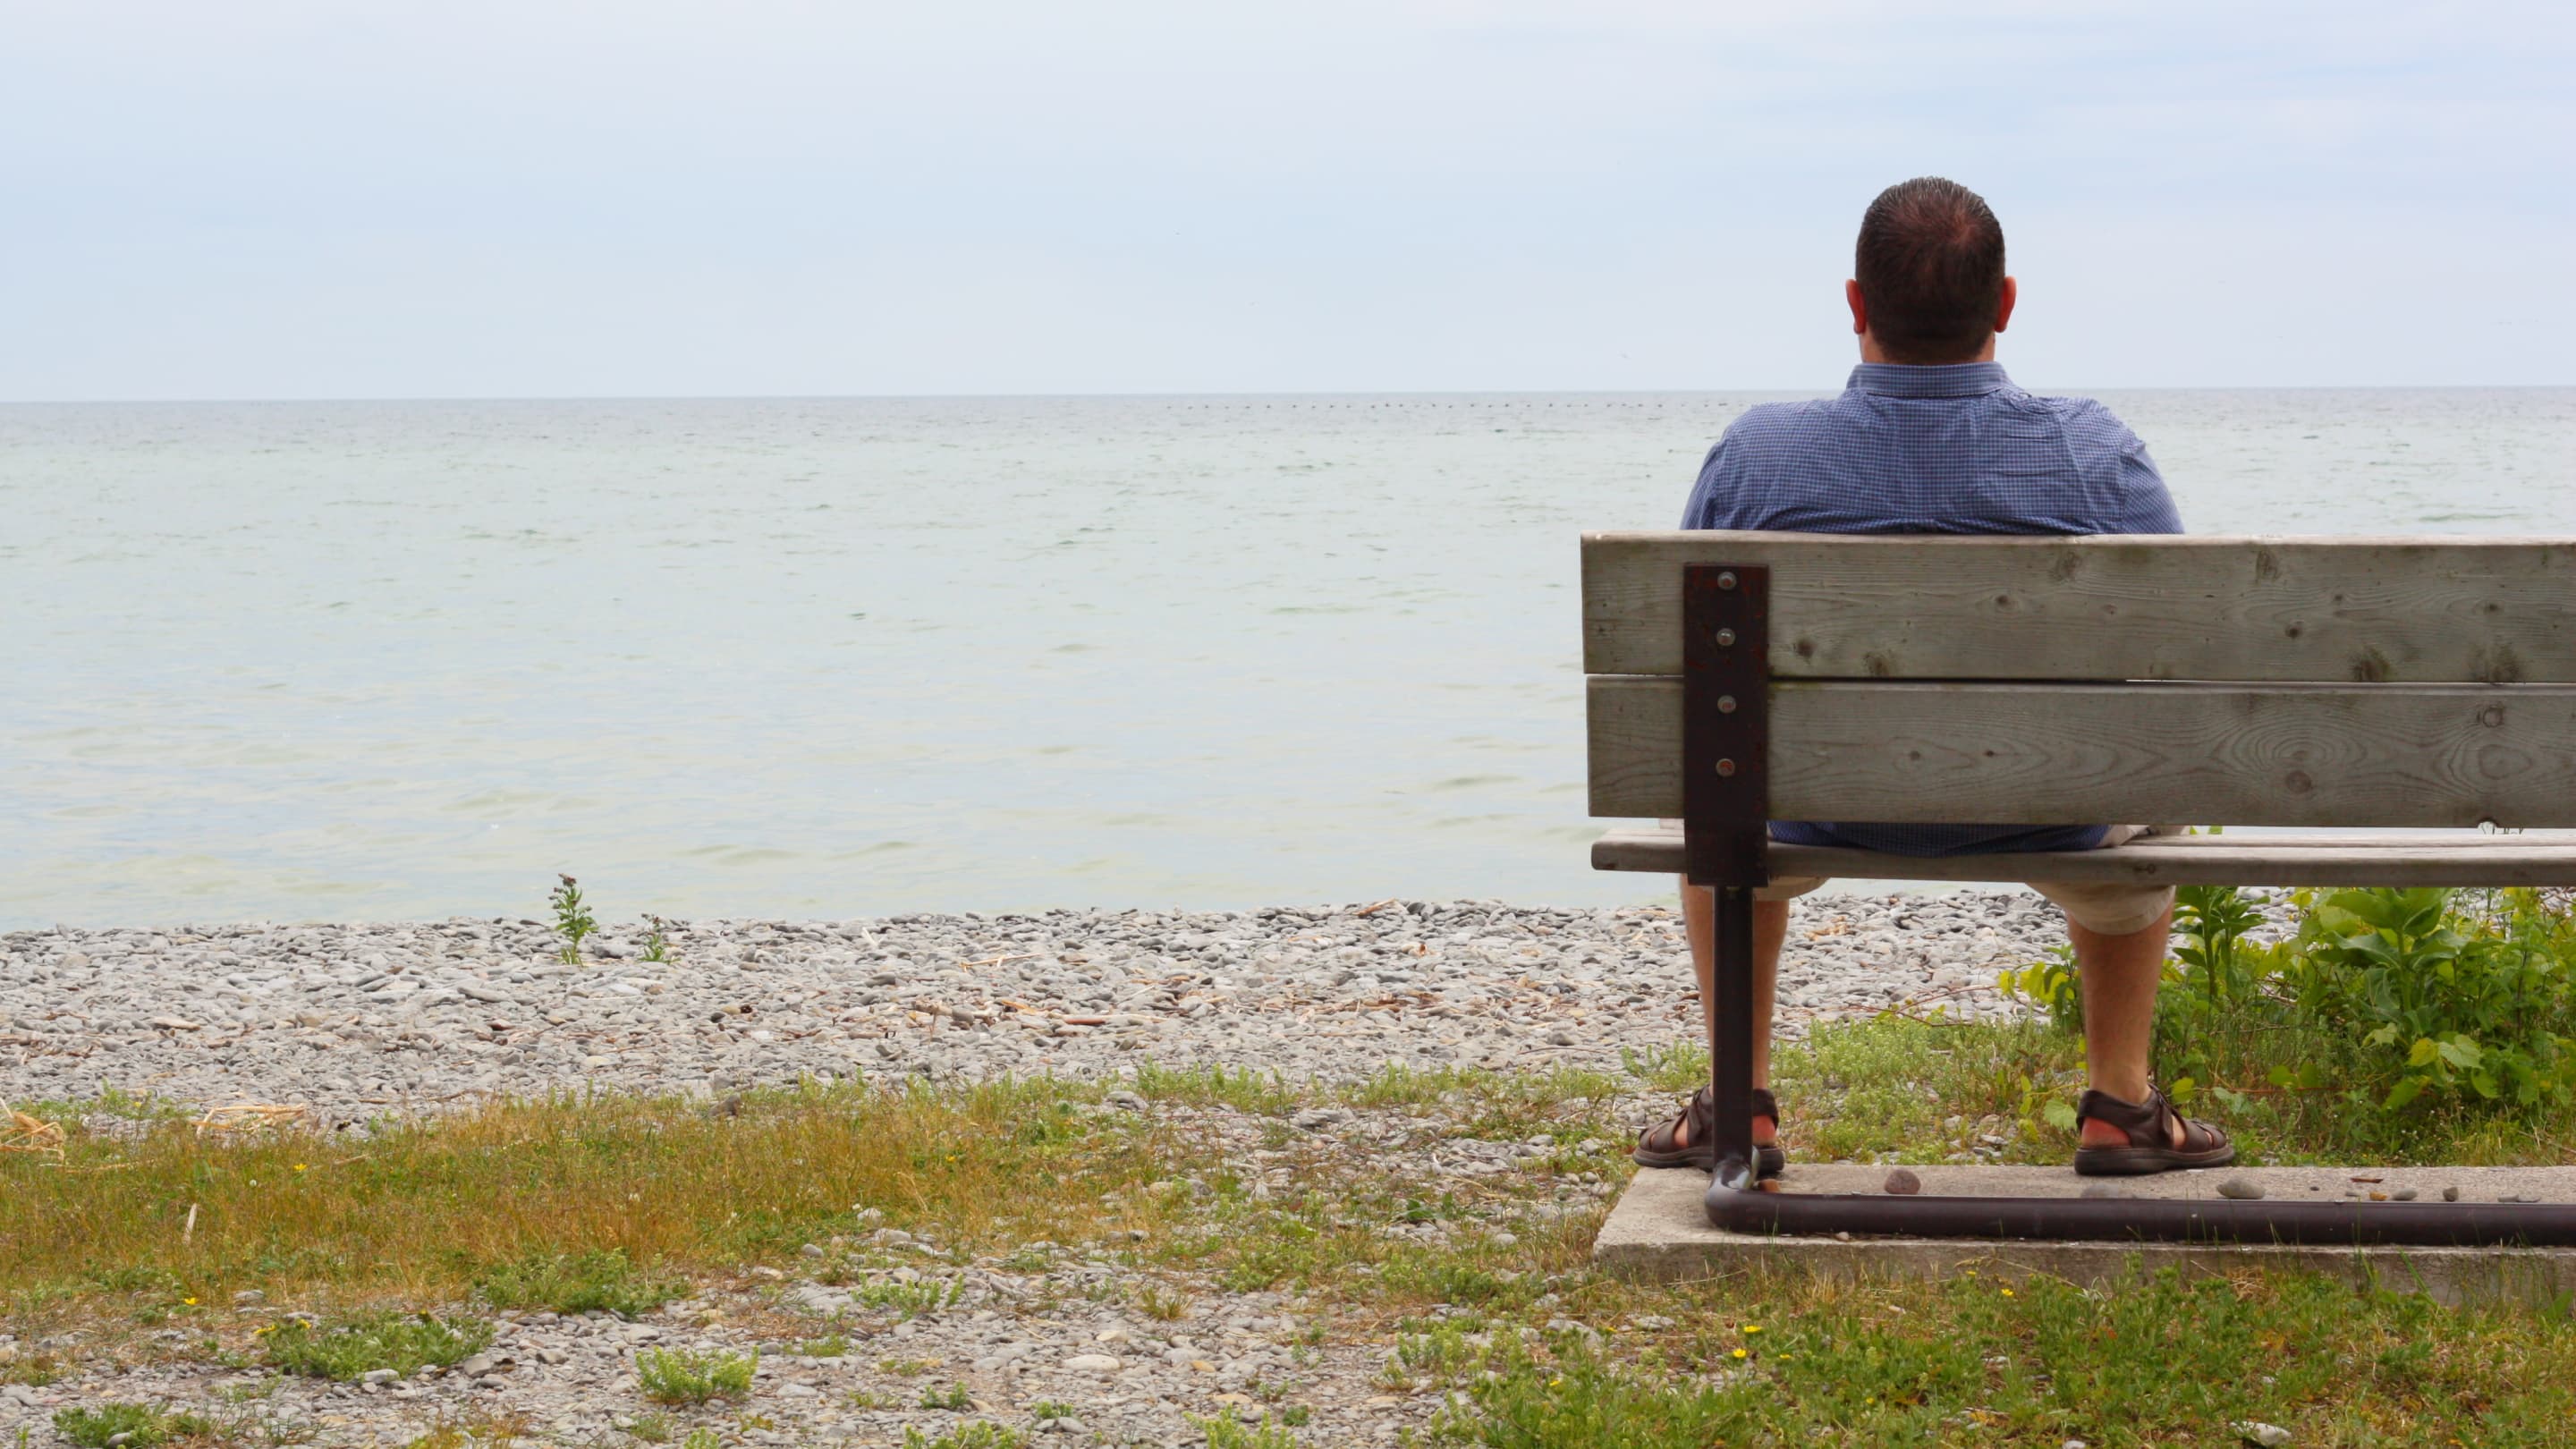 A man coping with heart failure sits on a bench at the beach looking out at the water.